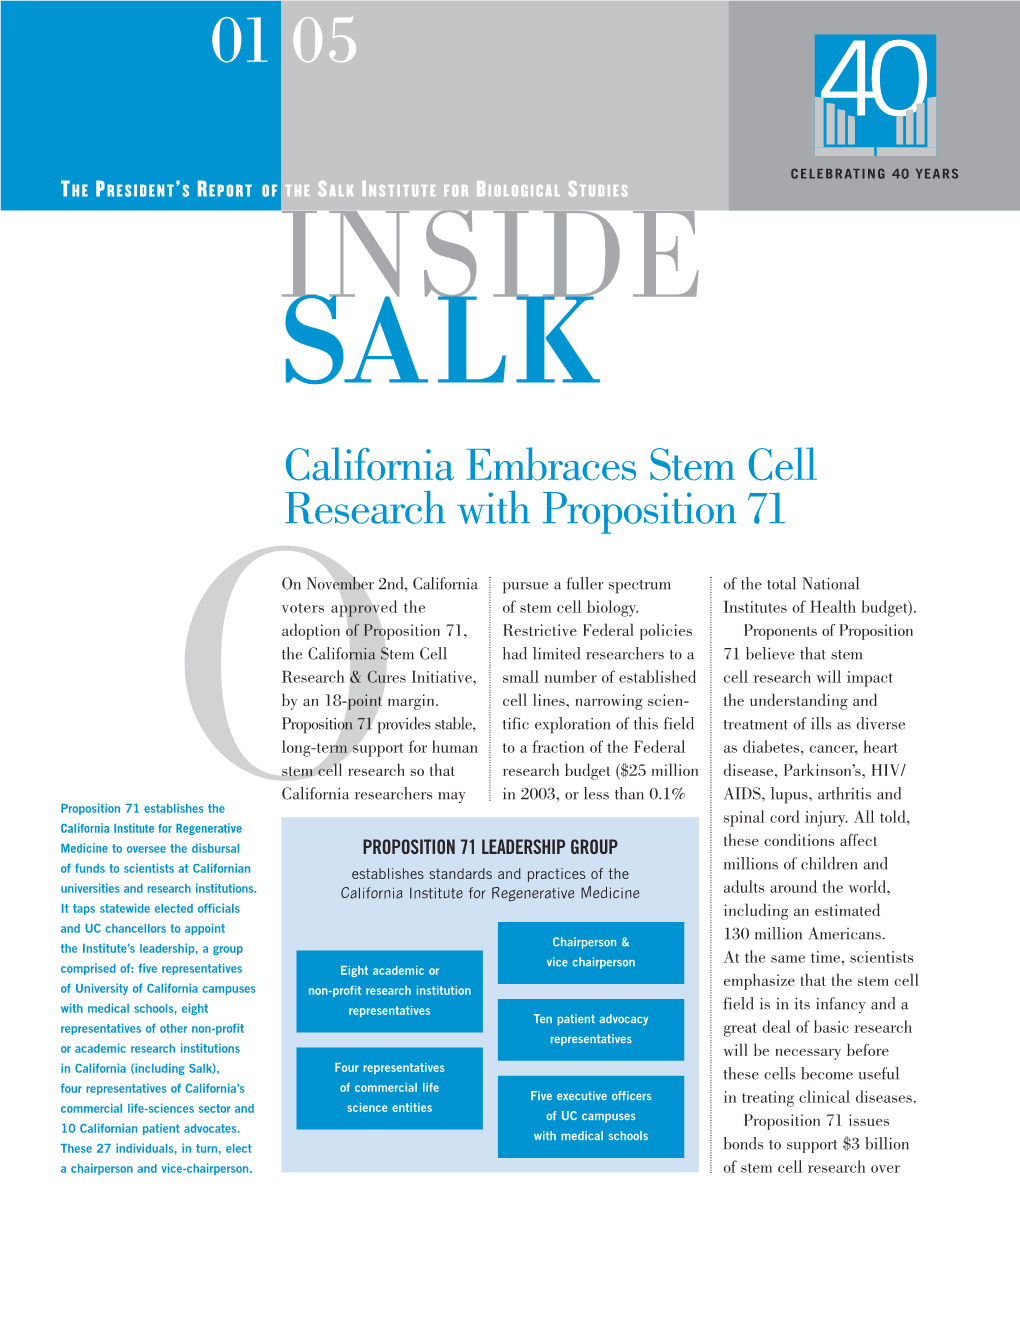 California Embraces Stem Cell Research with Proposition 71